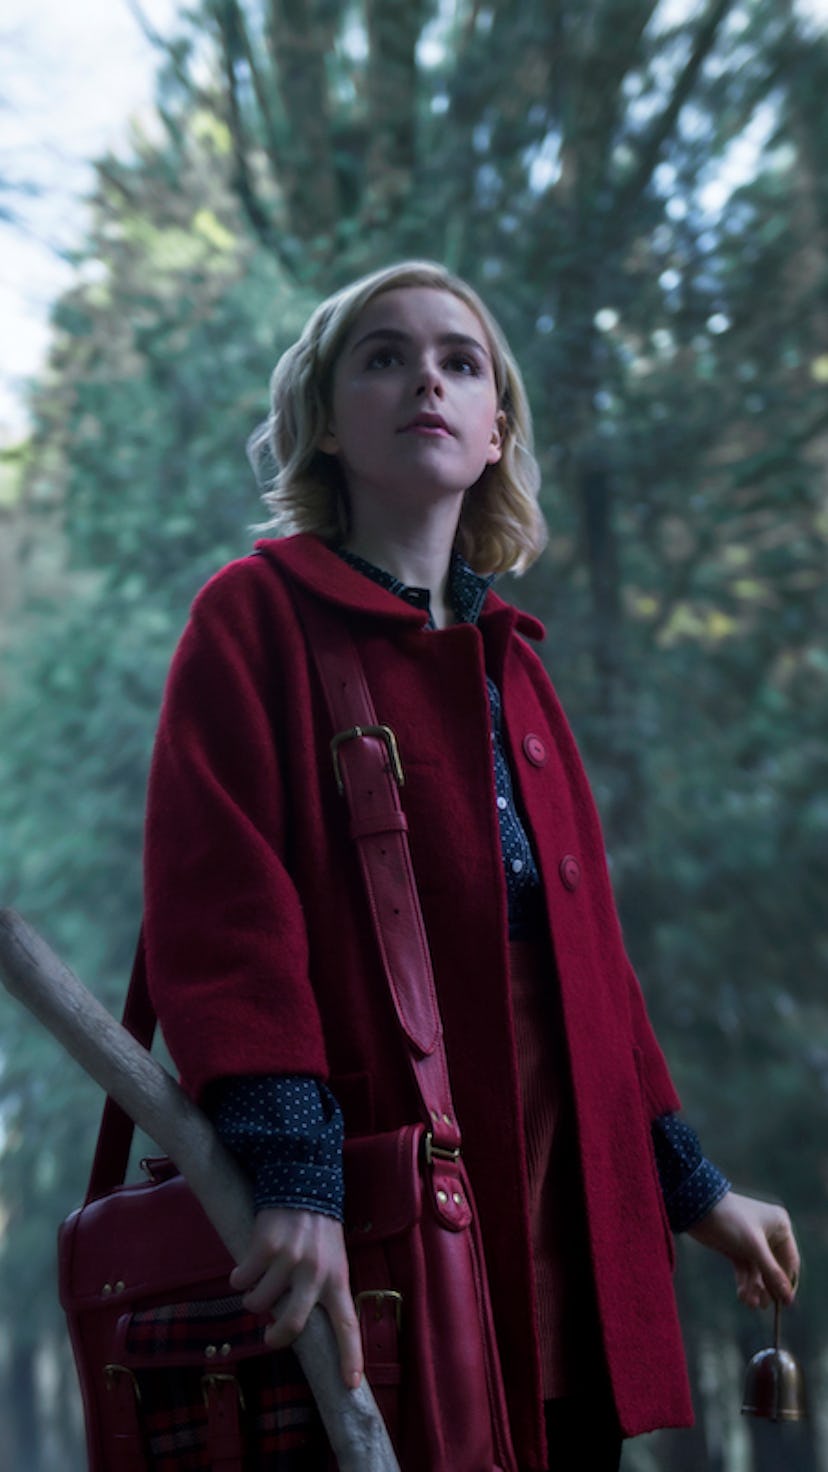 A still of Kiernan Shipka, from Chilling Adventures of Sabrina, standing in a wooded area, wearing a...